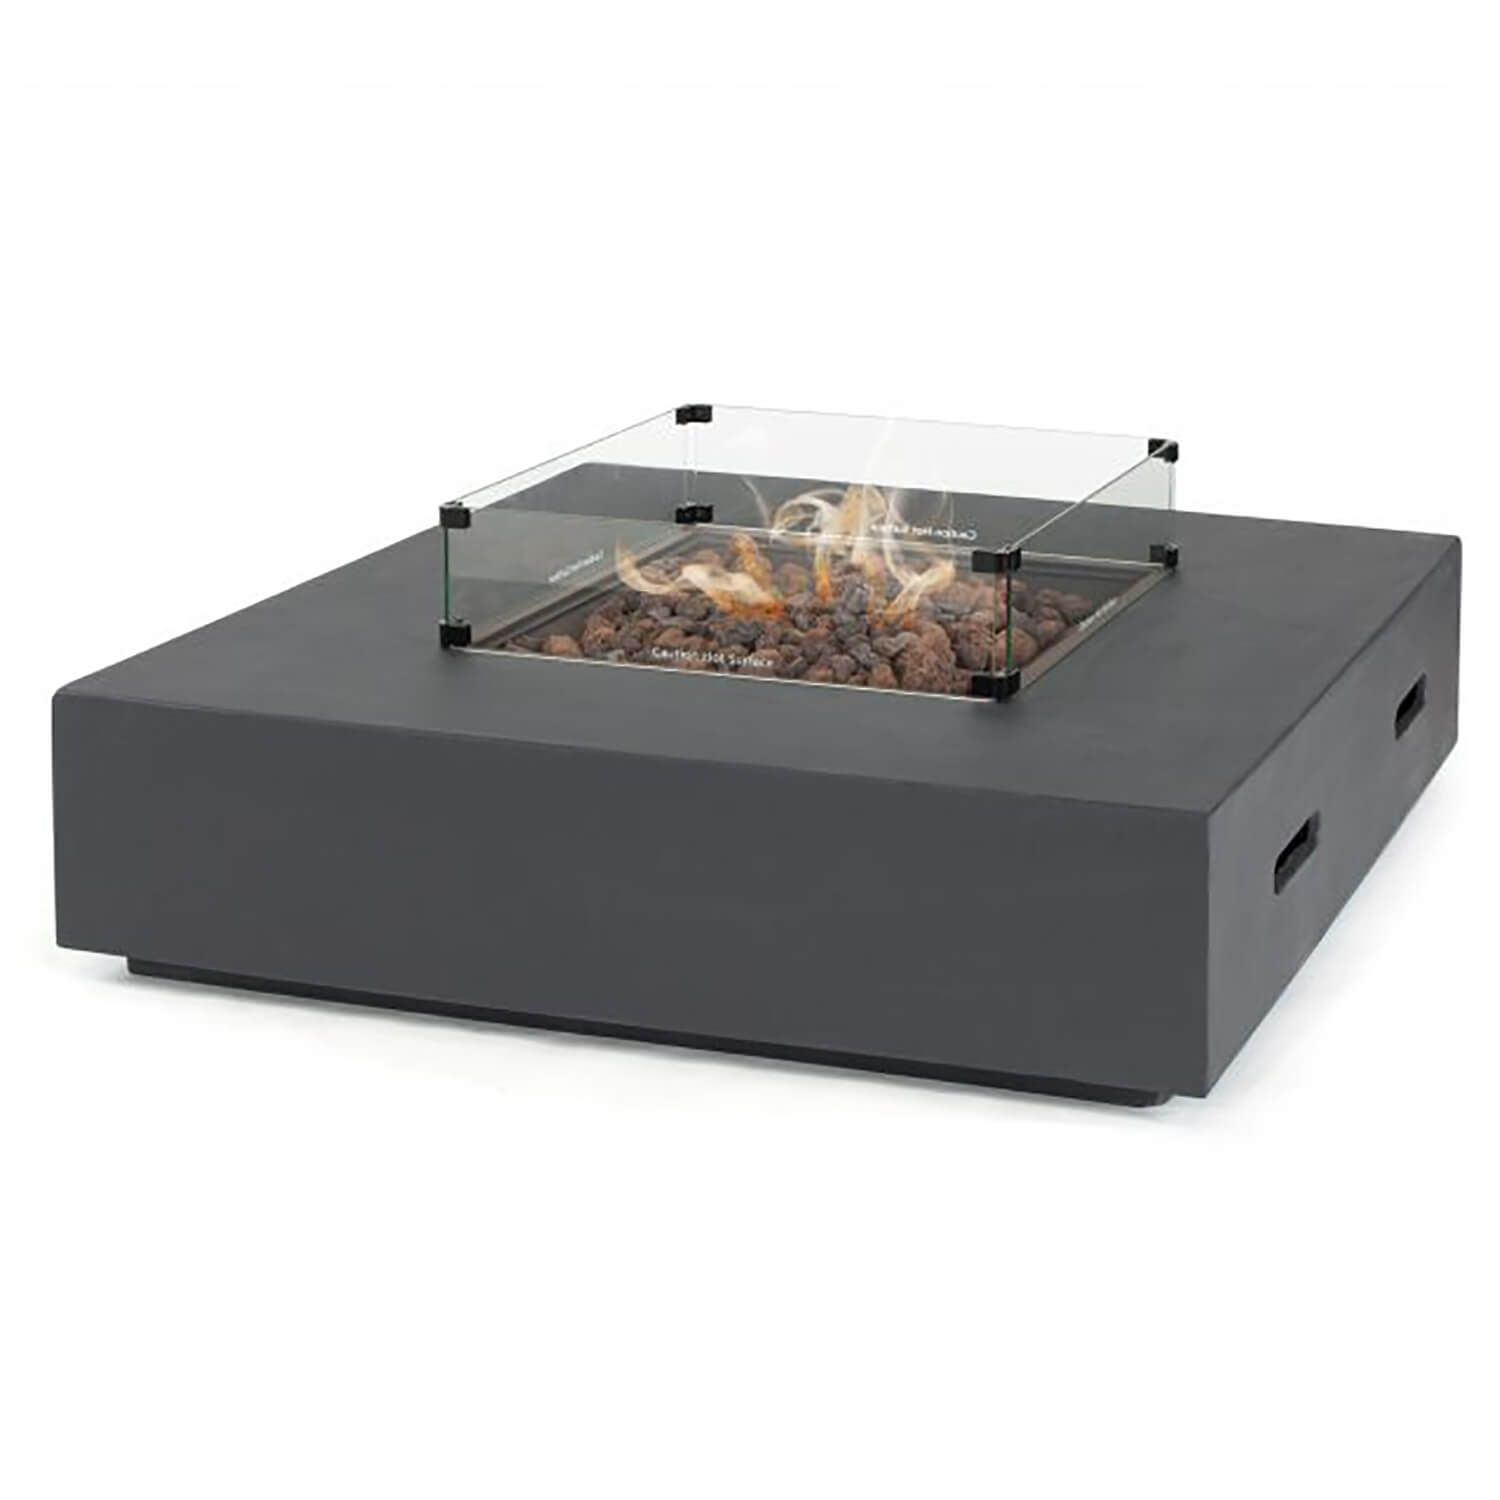 Kettler Kalos Universal Coffee Table, Fire Pit Table Uk